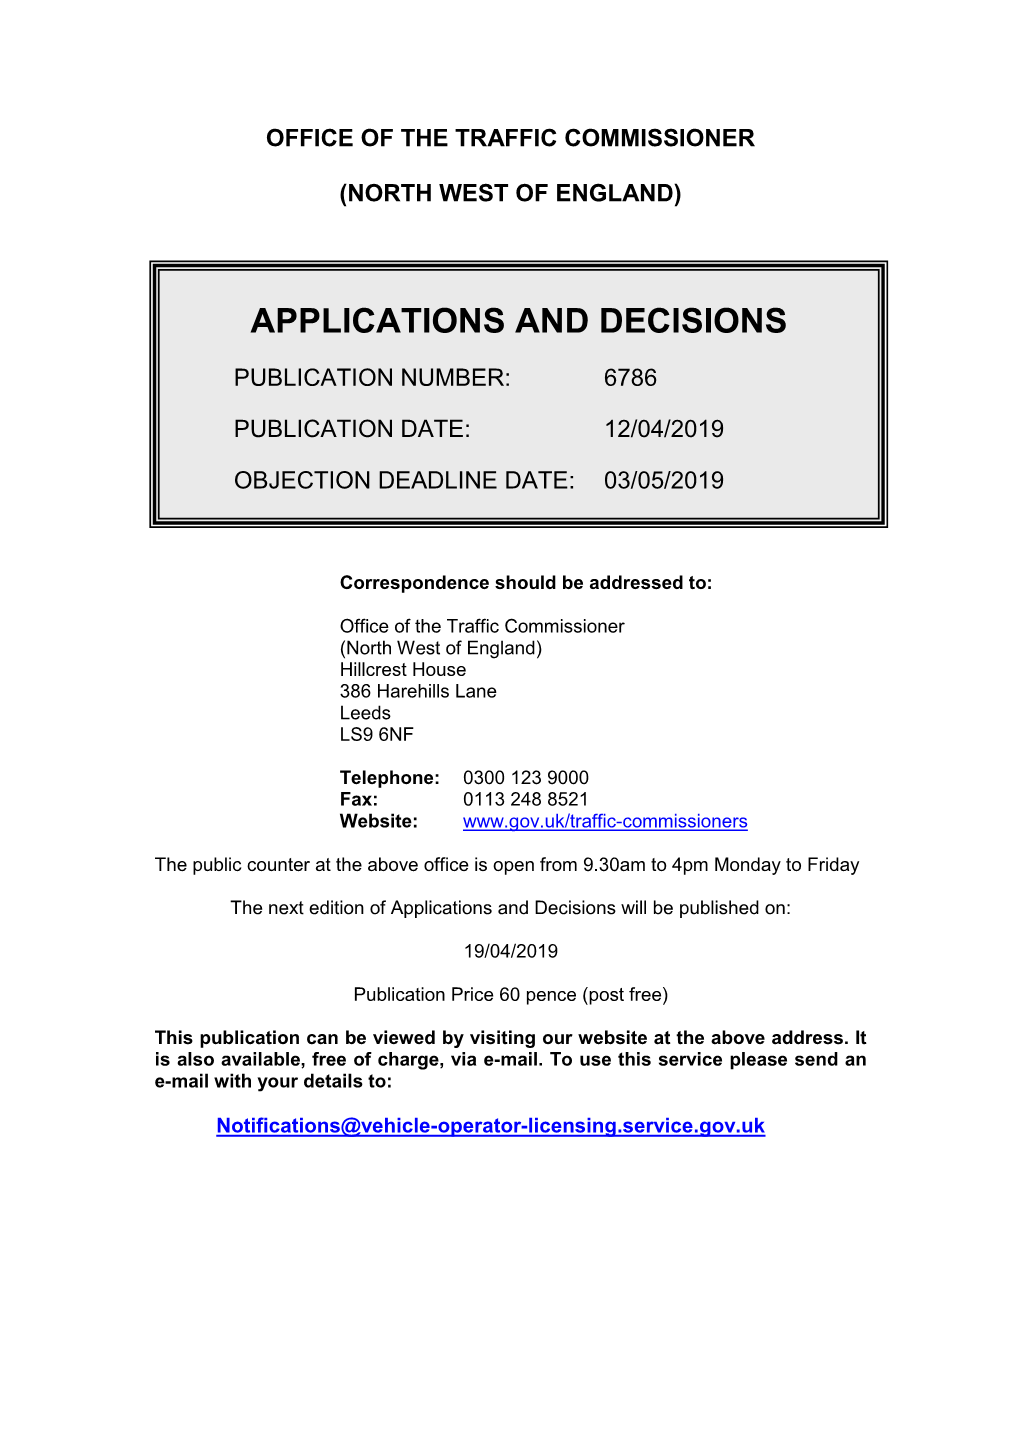 Applications and Decisions for the North West of England